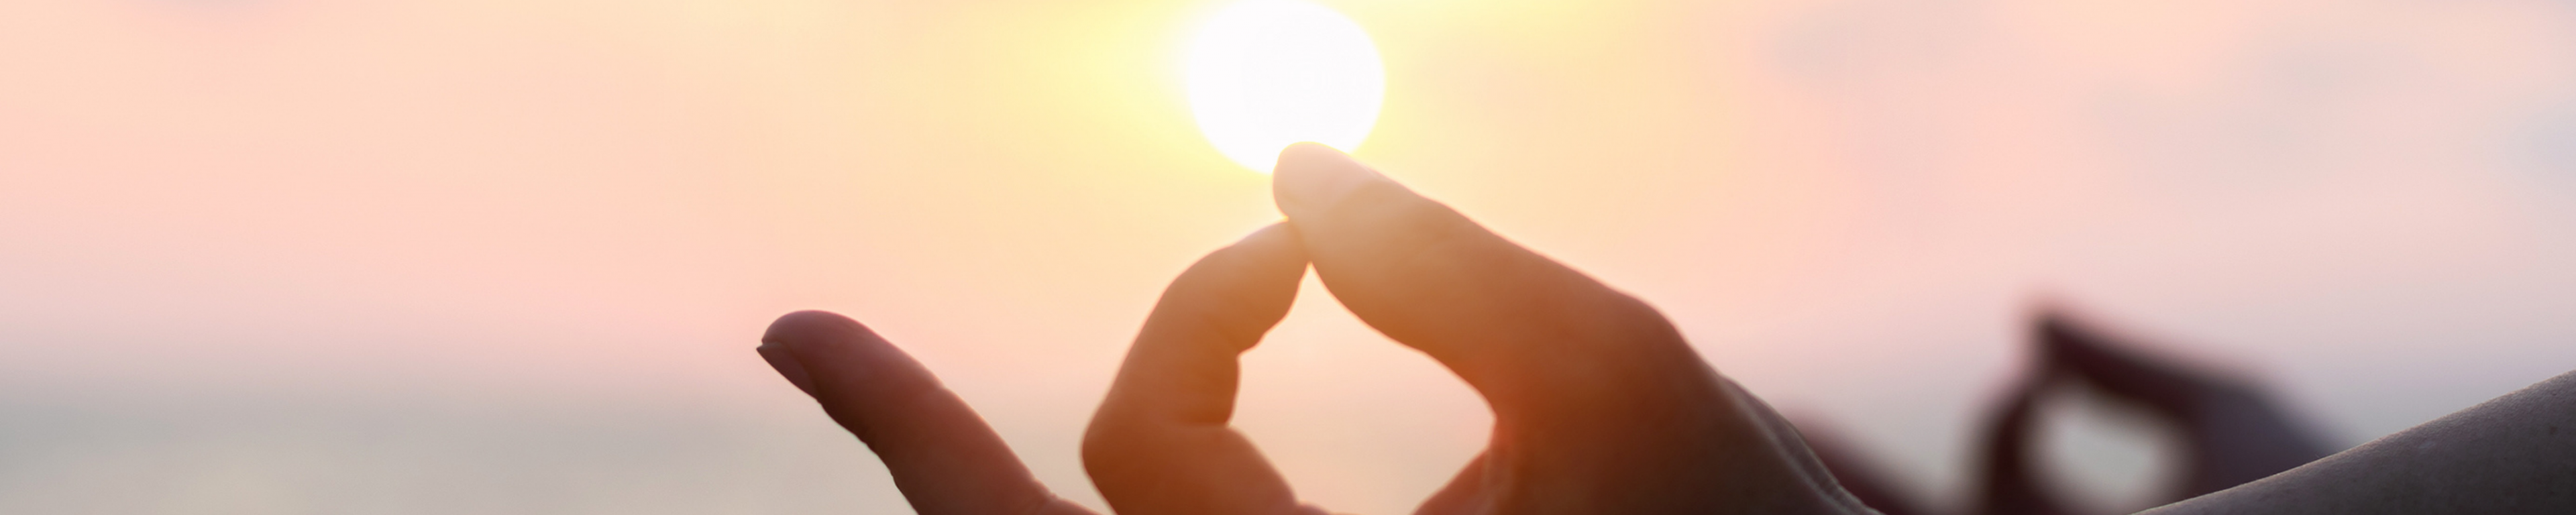 hand in a yoga mudra position resting on a knee in a silhouette against a sunset